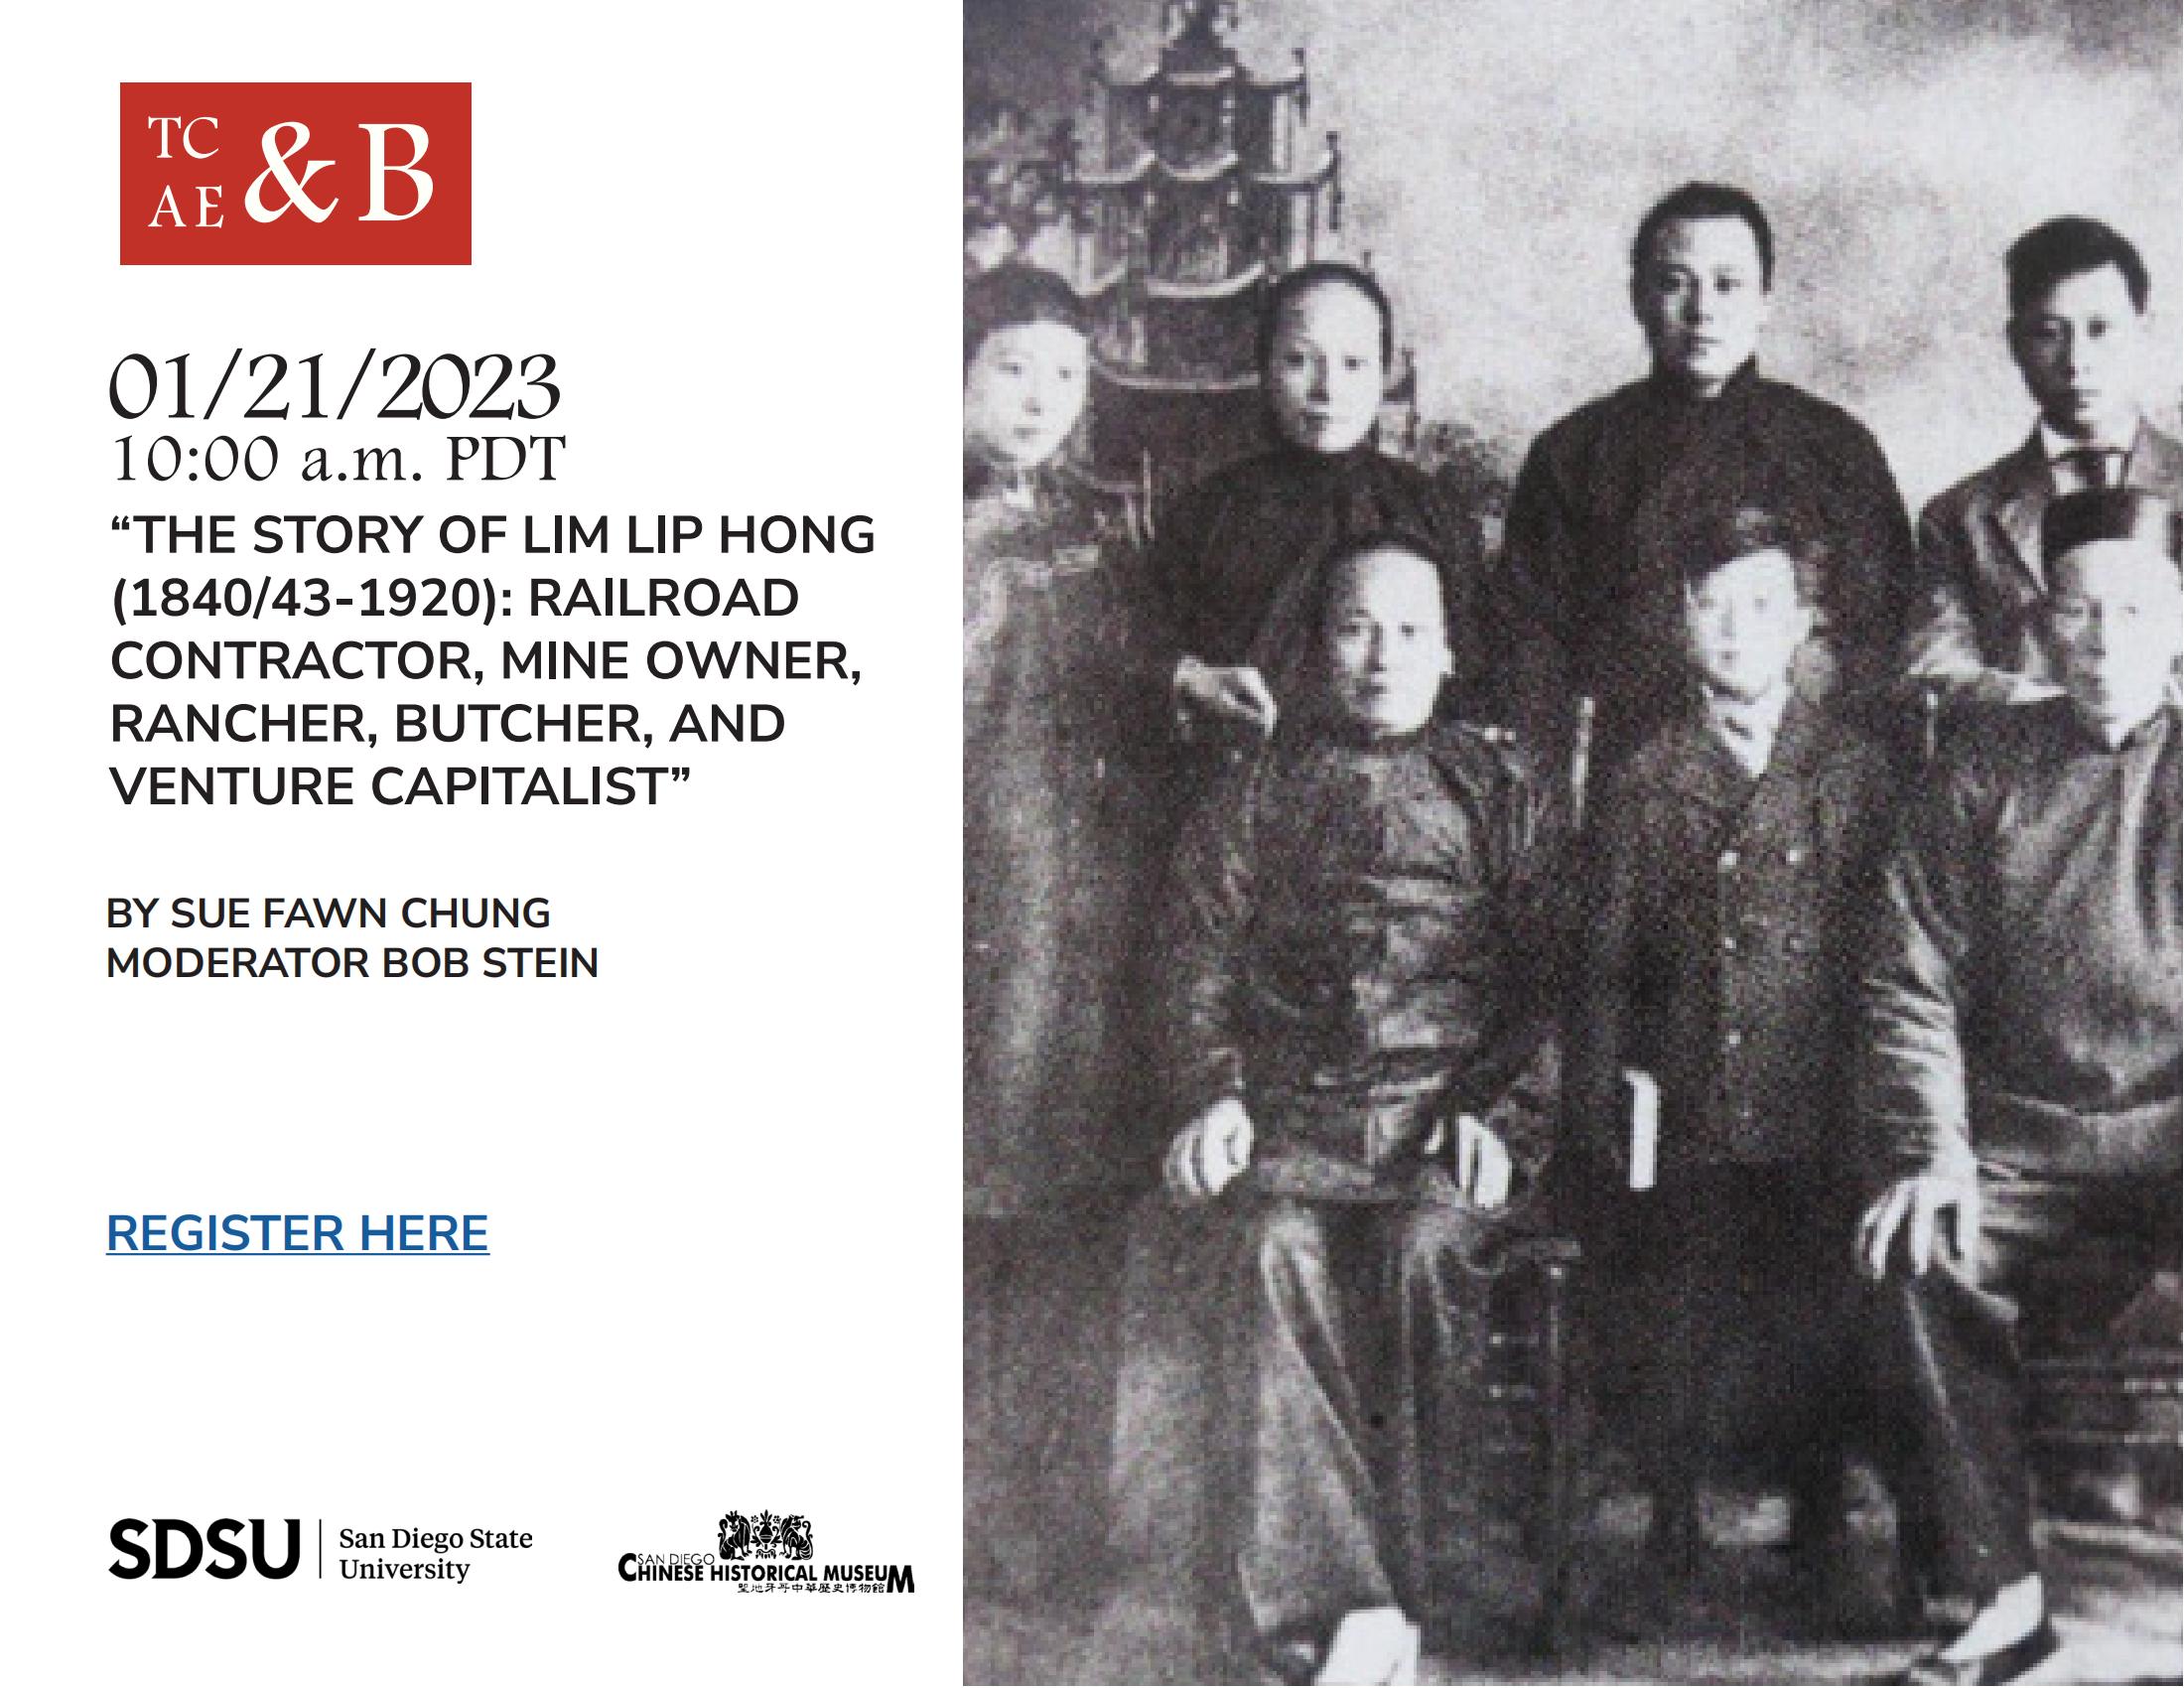 “The Story of Lim Lip Hong (1840/43-1920): Railroad Contractor, Mine Owner, Rancher, Butcher, and Venture Capitalist”